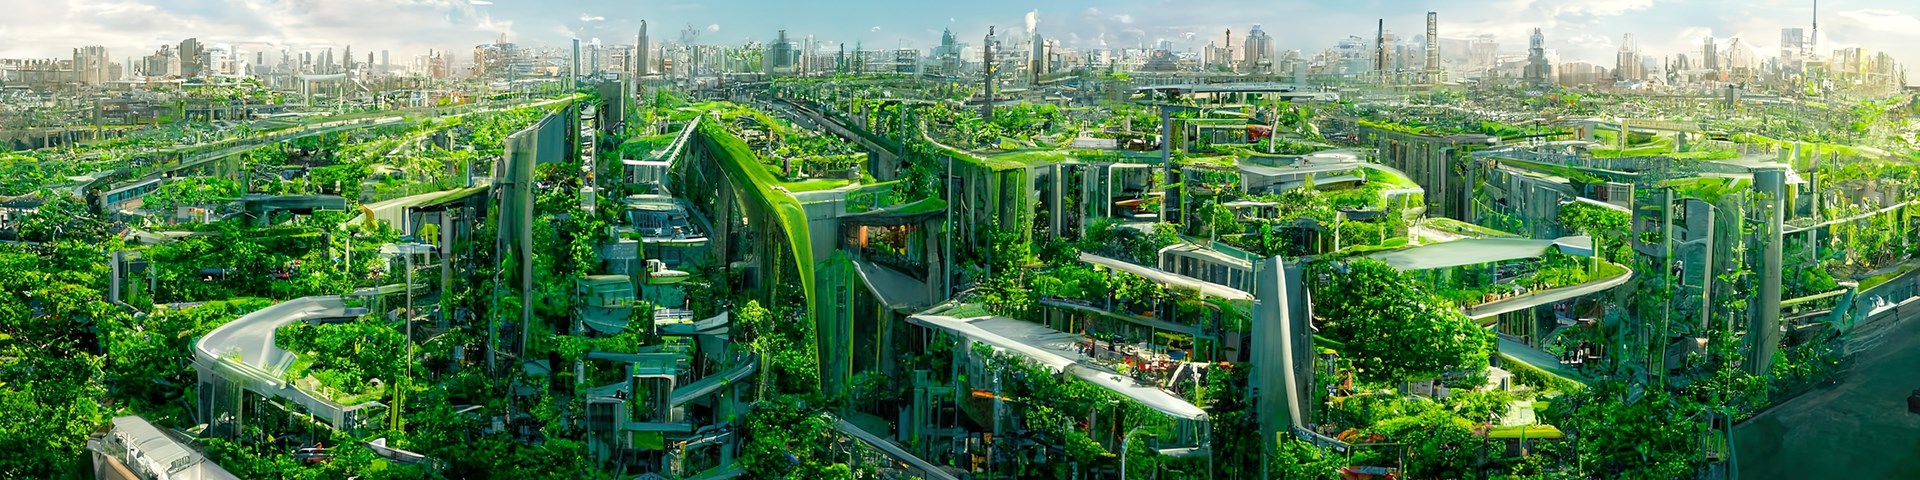 A look at the cities of the future